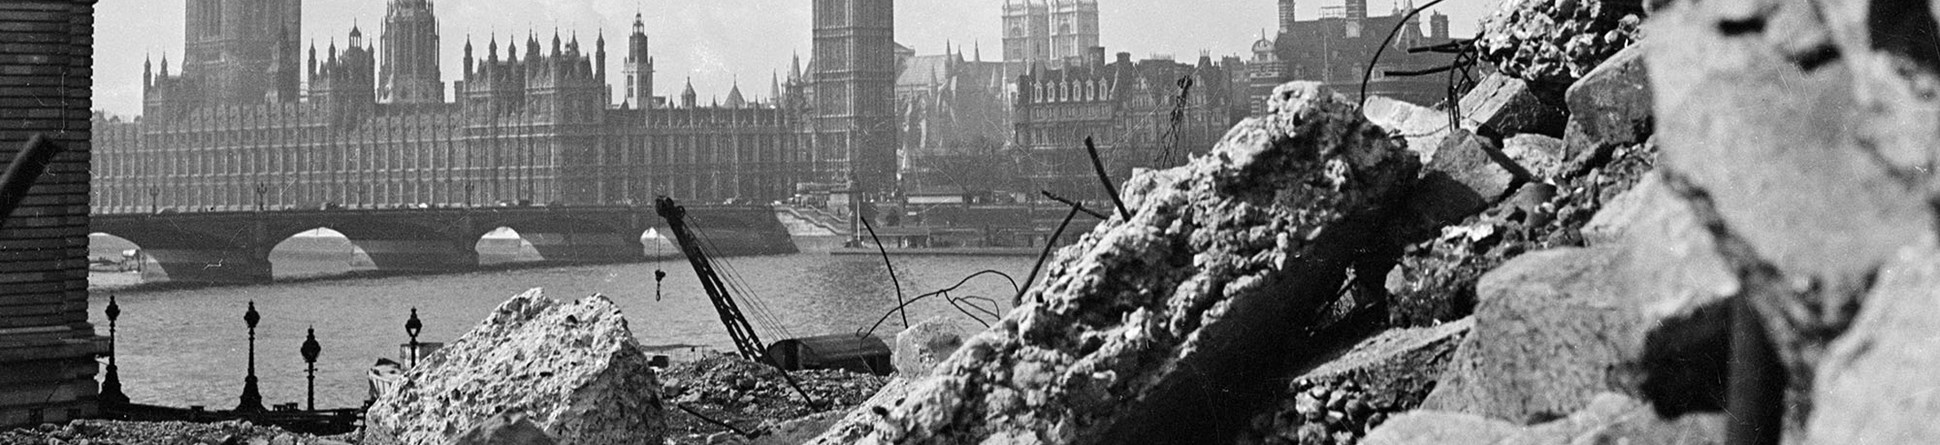 View of Big Ben and the Houses of Parliament through rubble in the foreground